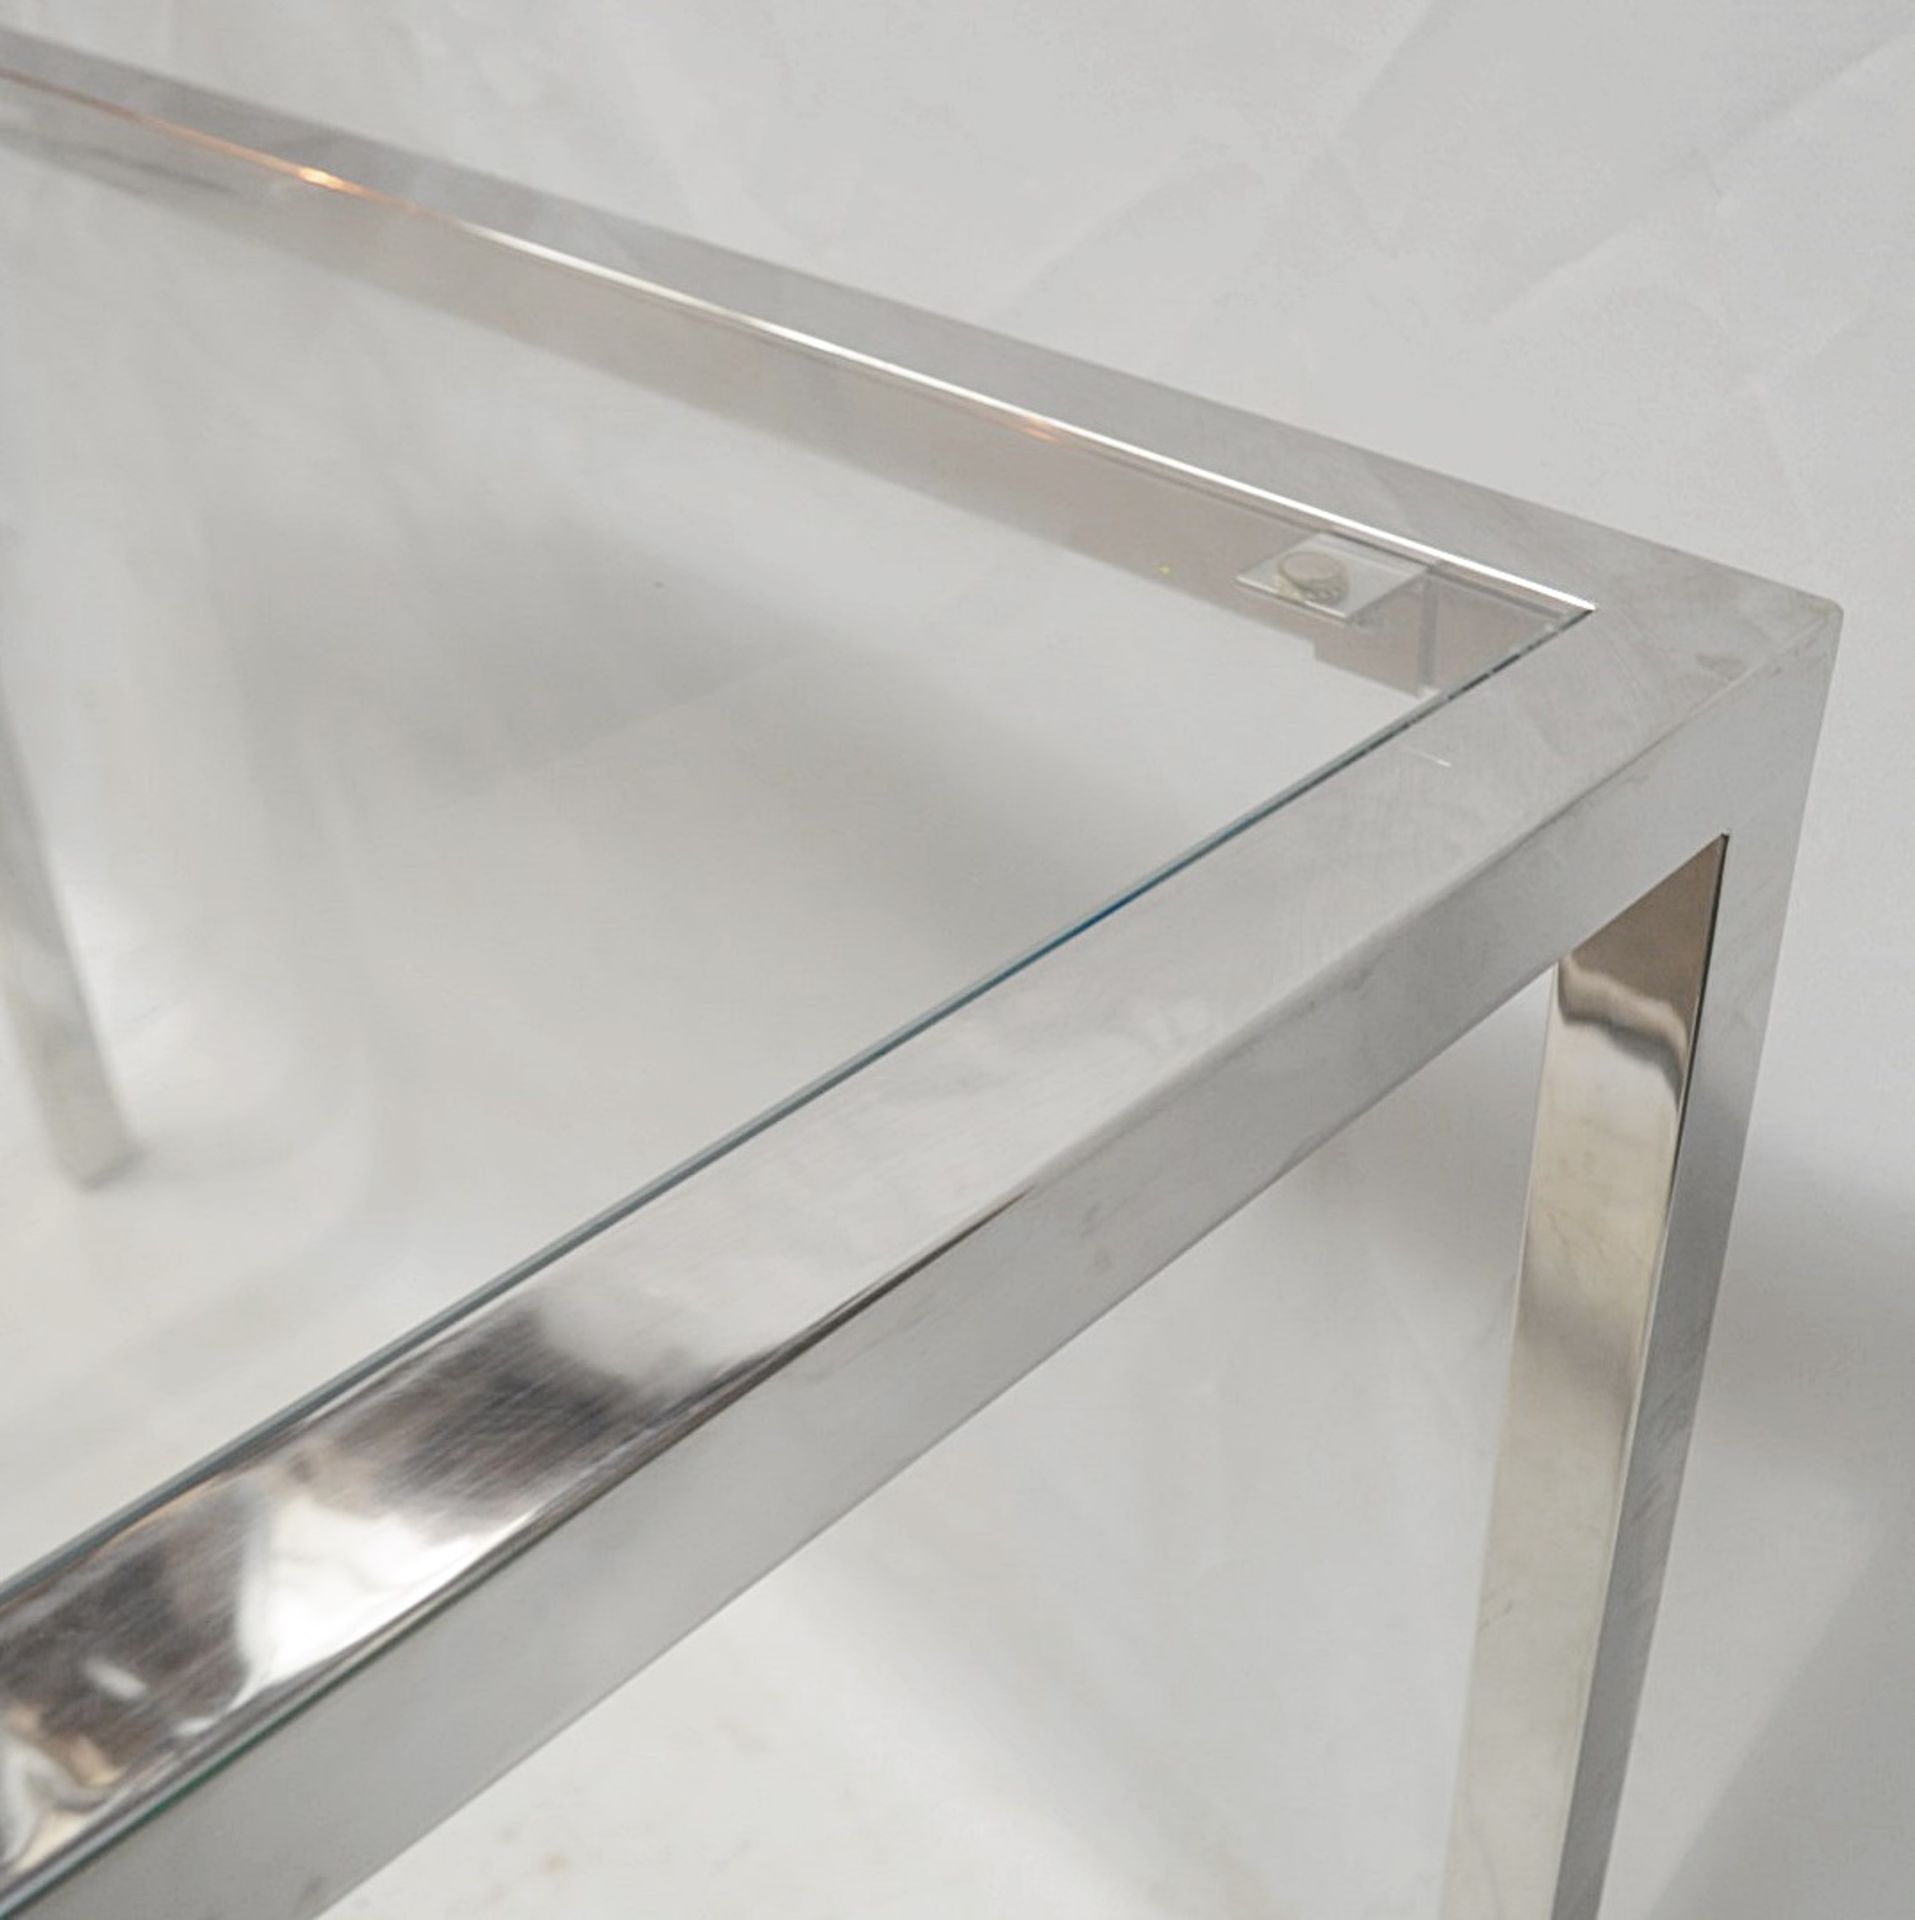 1 x Rectangular Glass Topped Retail Display Table - Dimensions: H92 x W135 x D90cm - Ex-Display - Image 3 of 4